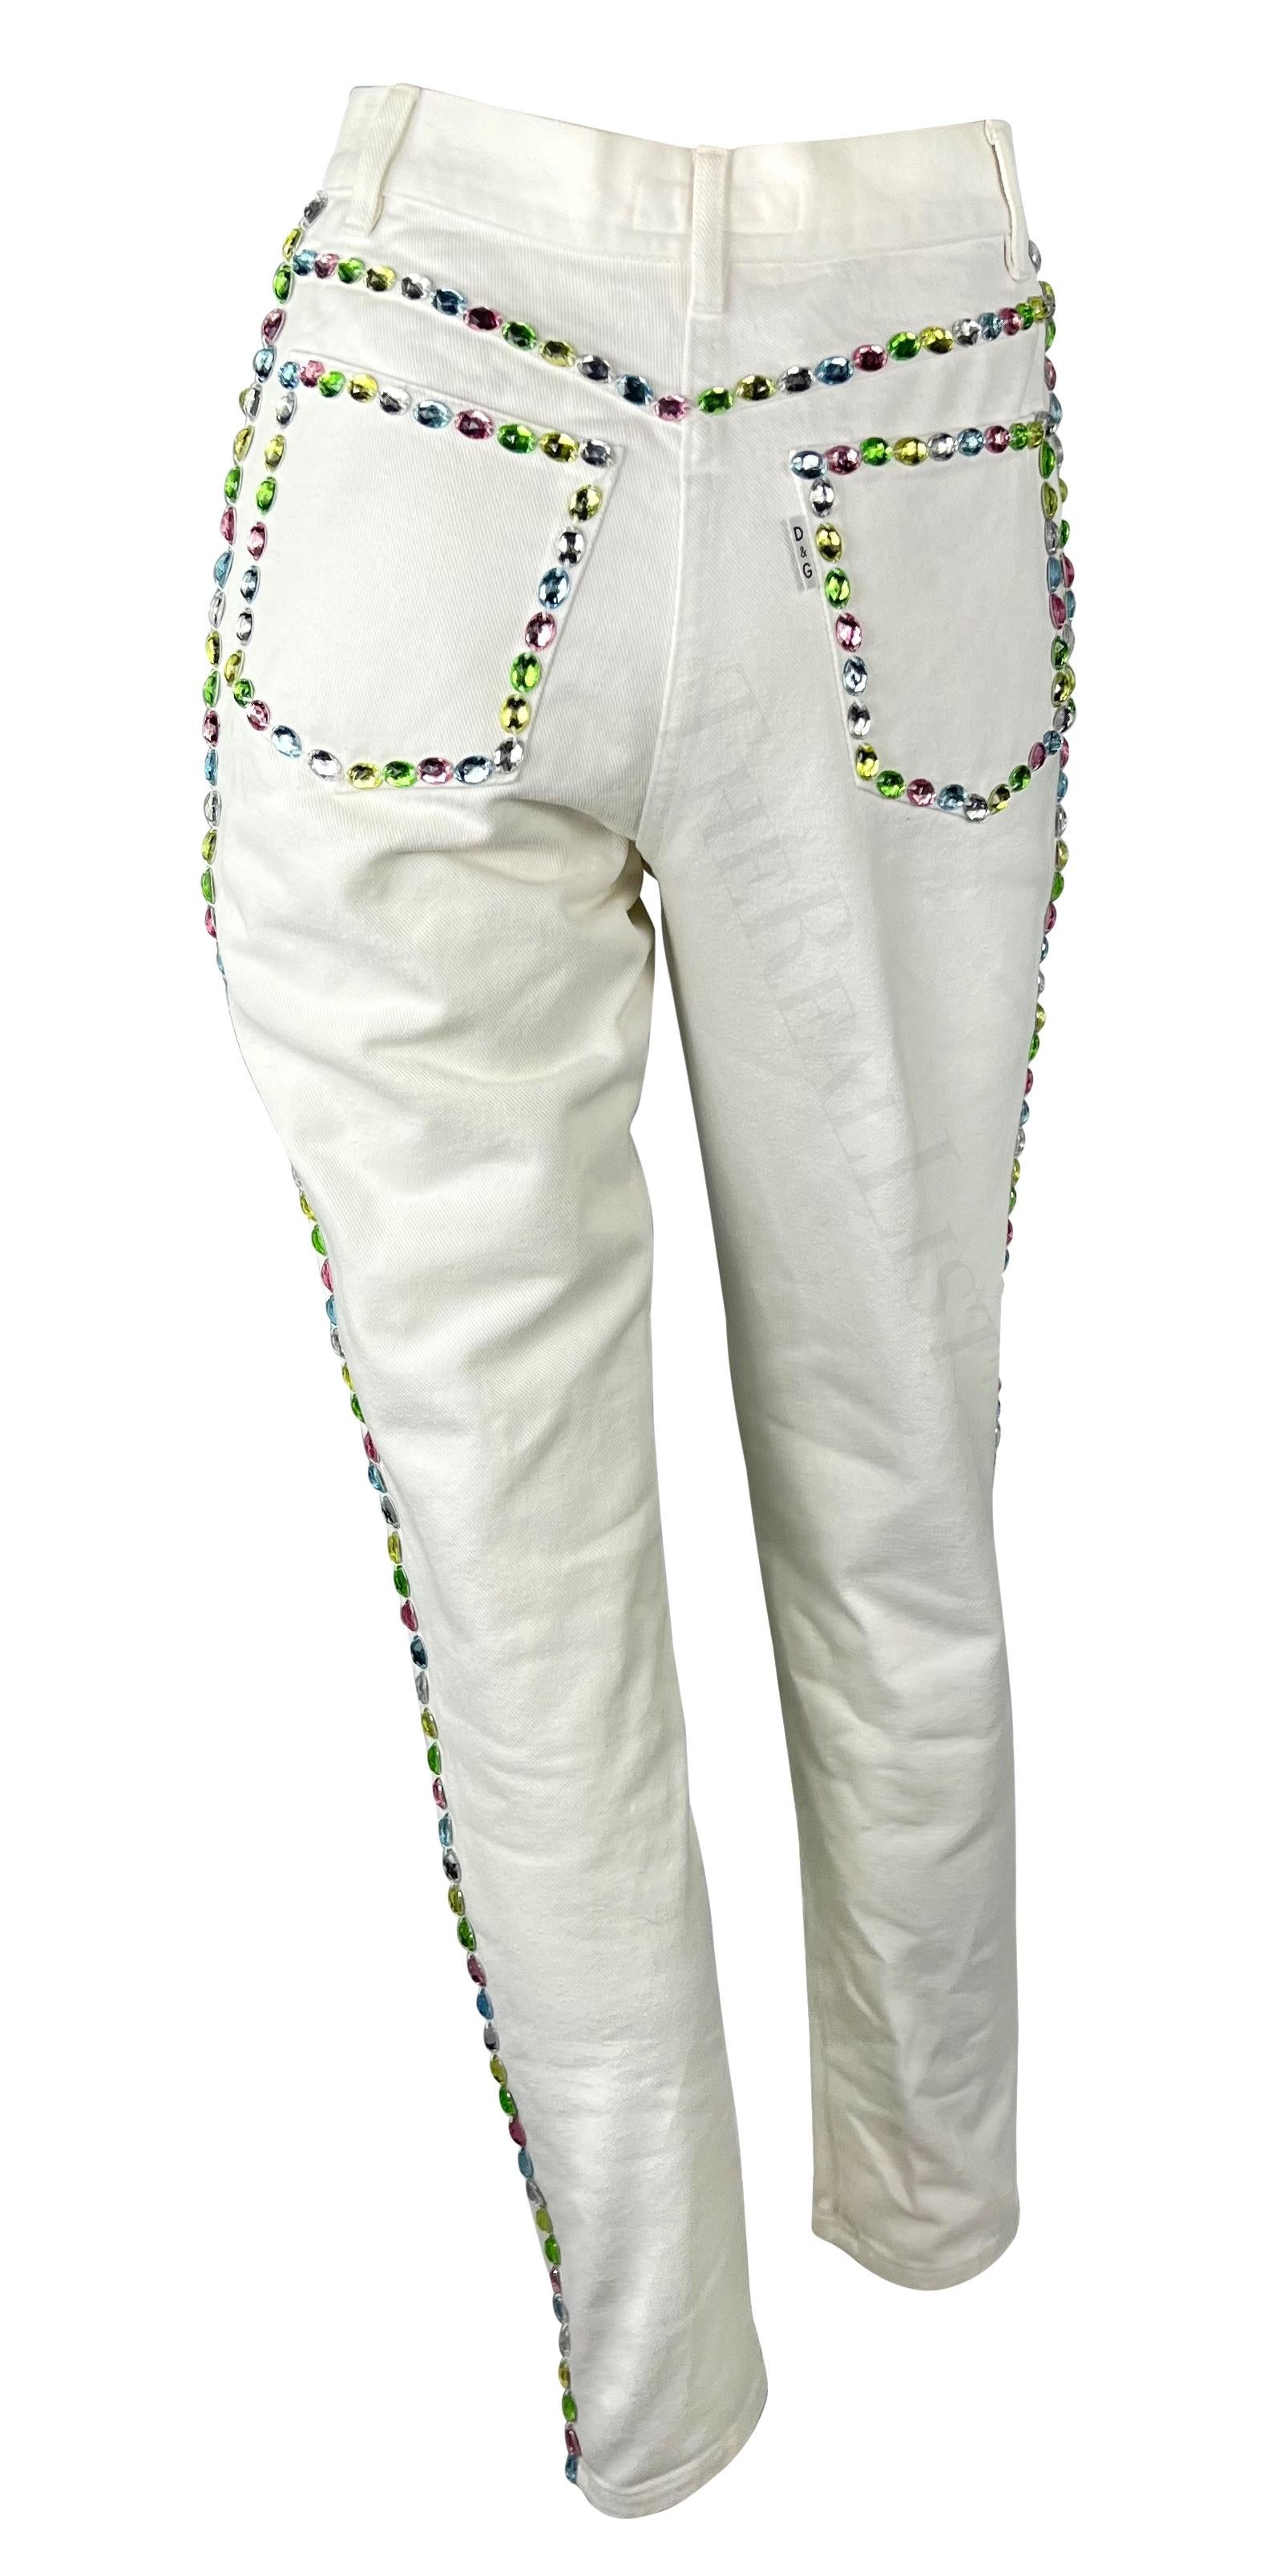 Early 1990s Dolce & Gabbana White Denim Multicolor Pastel Rhinestone Jeans In Excellent Condition For Sale In West Hollywood, CA